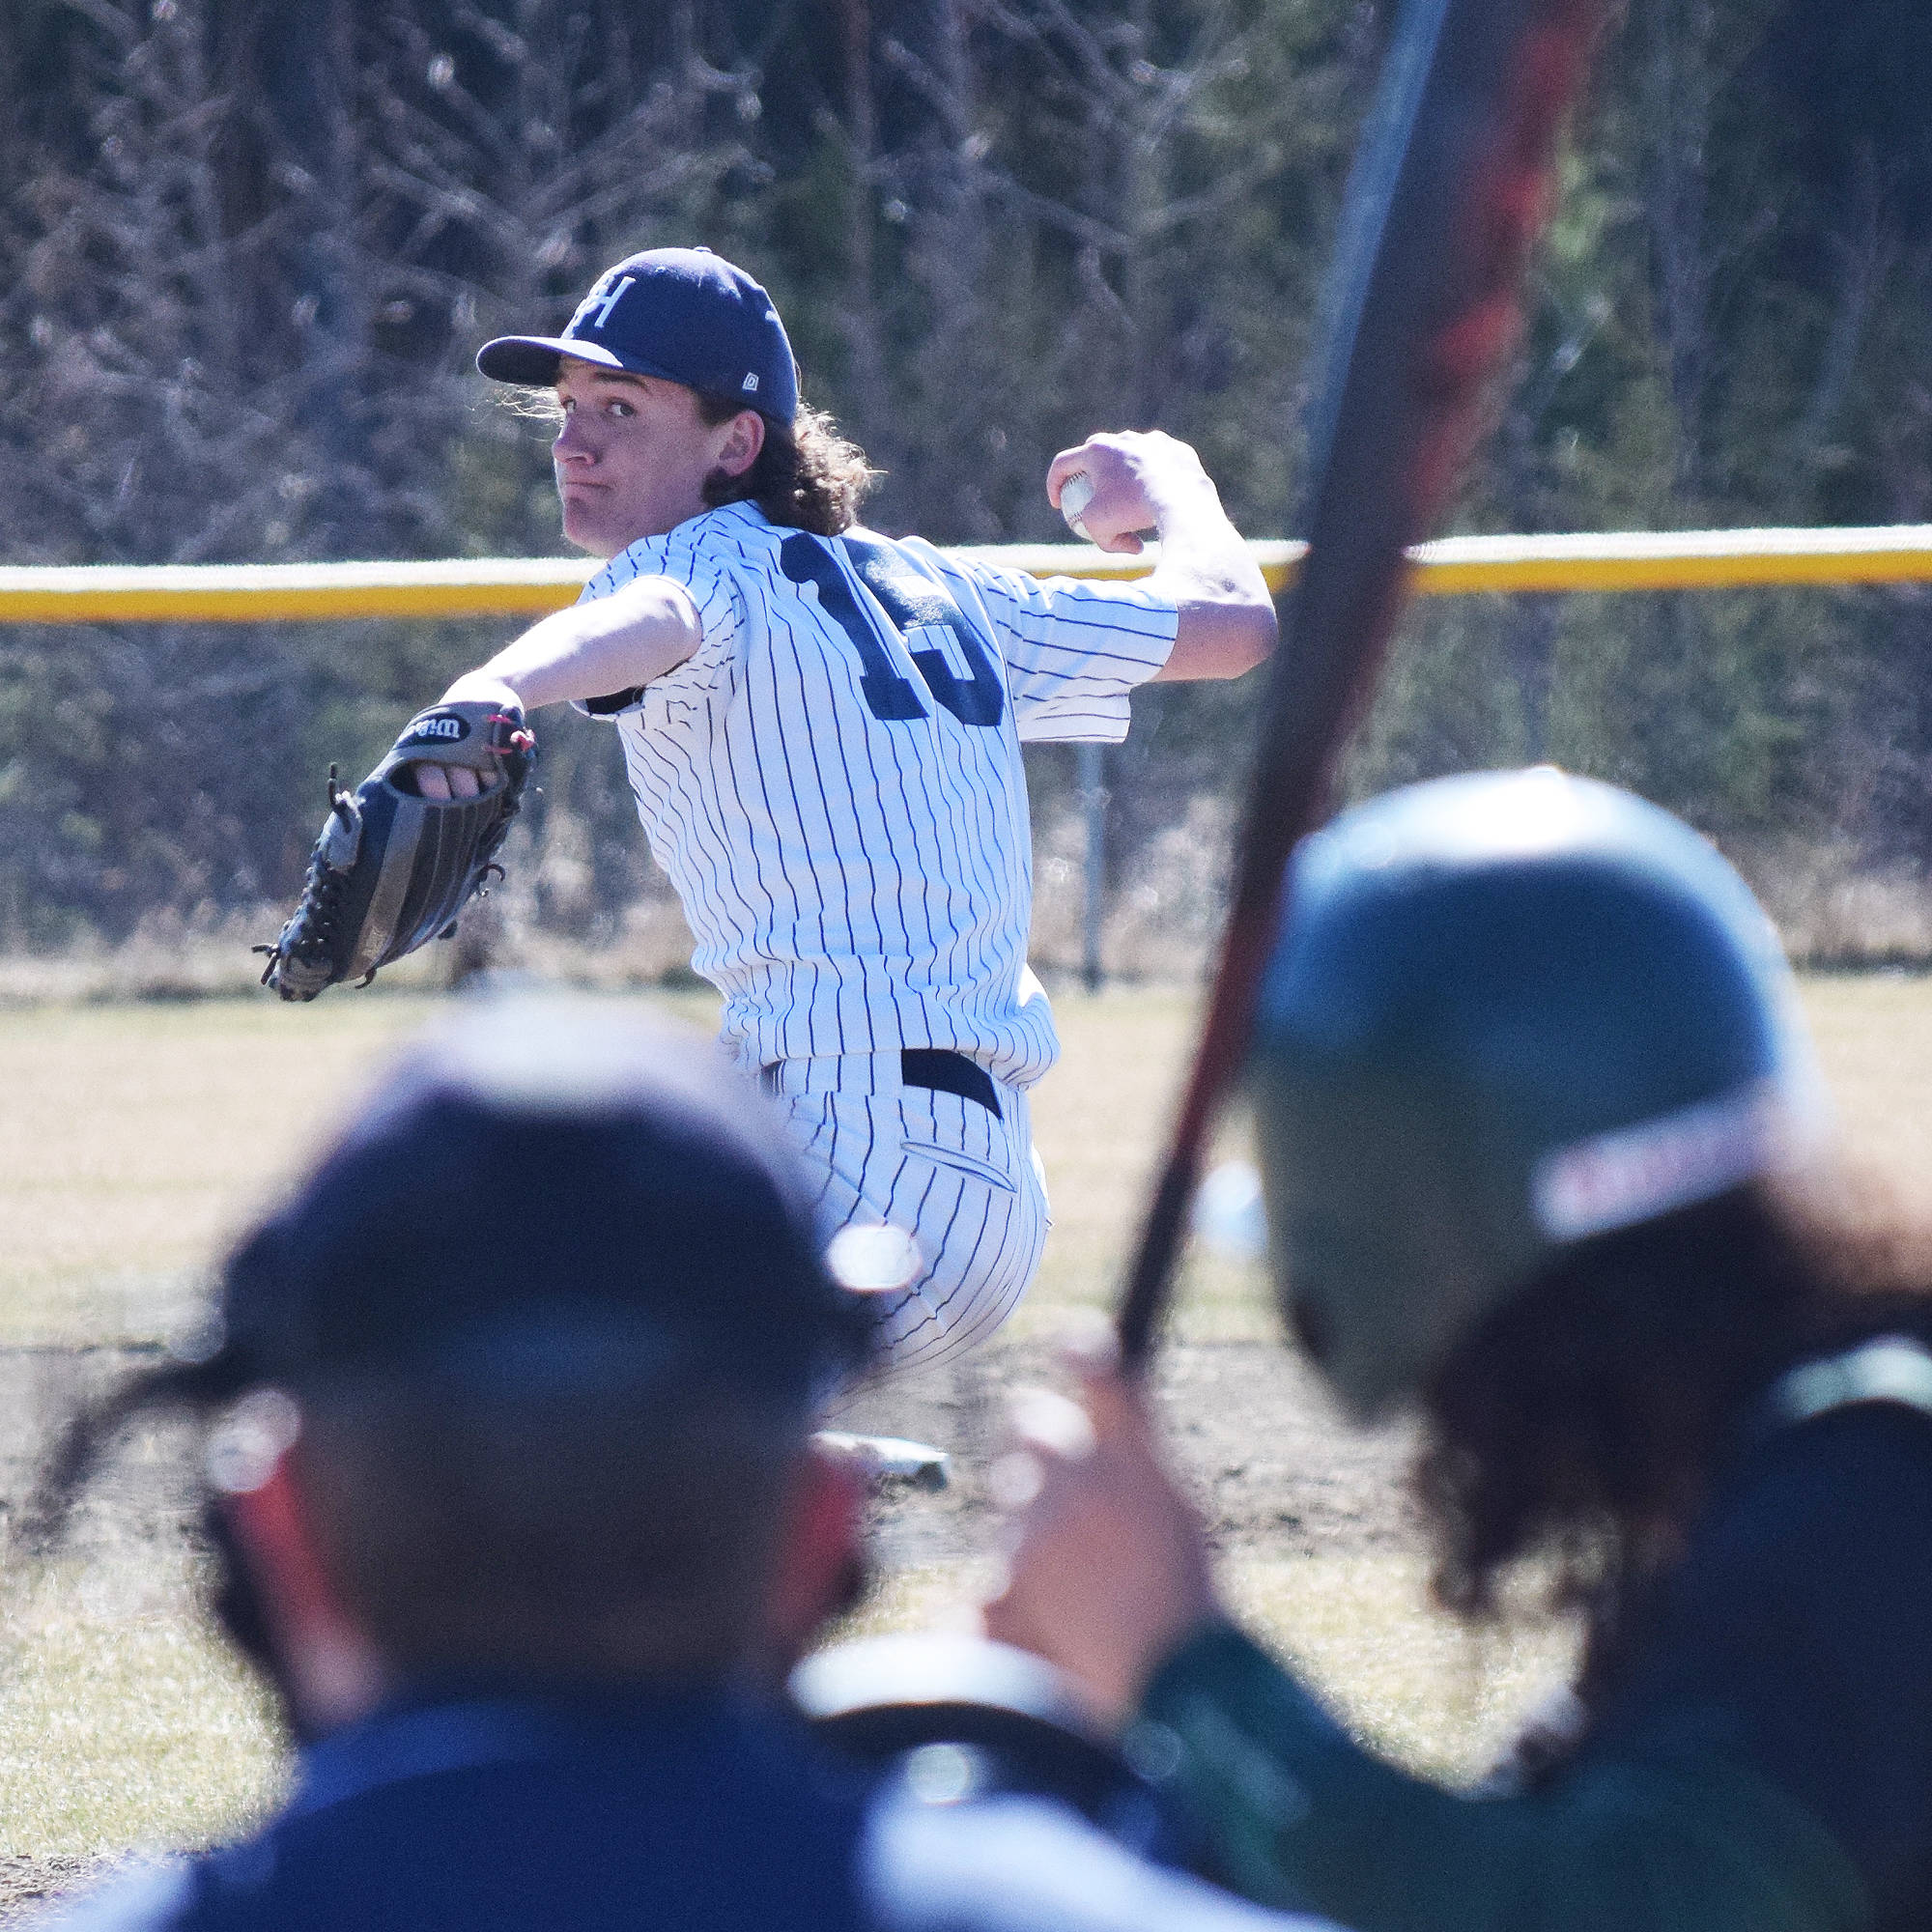 Soldotna pitcher Matthew Daugherty winds up for the throw against a Colony batter Tuesday afternoon at the Soldotna baseball fields. (Photo by Joey Klecka/Peninsula Clarion)